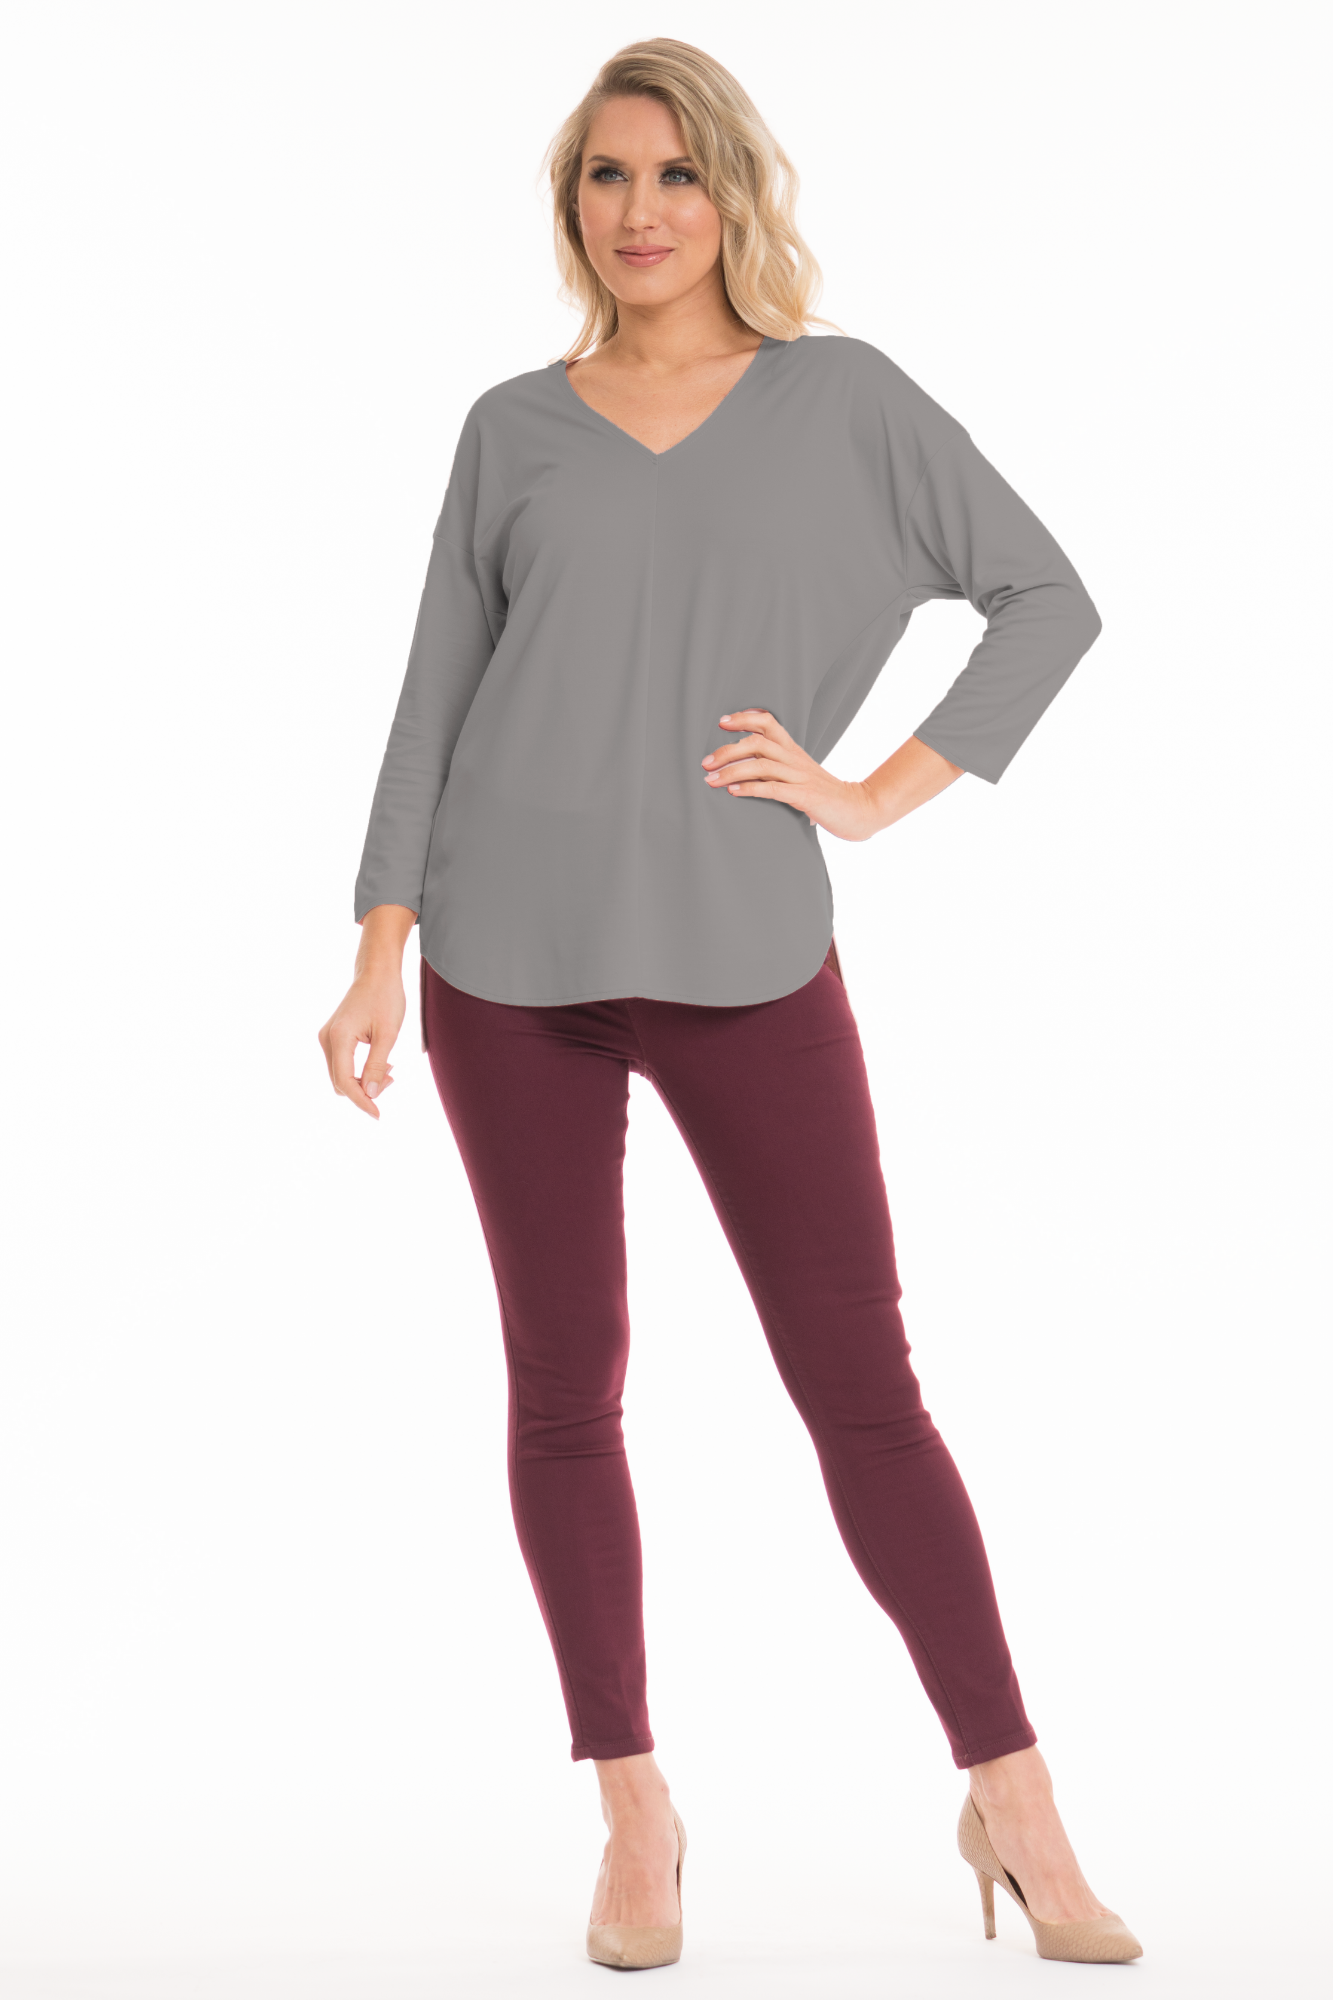 grey knit top with 3/4 sleeves